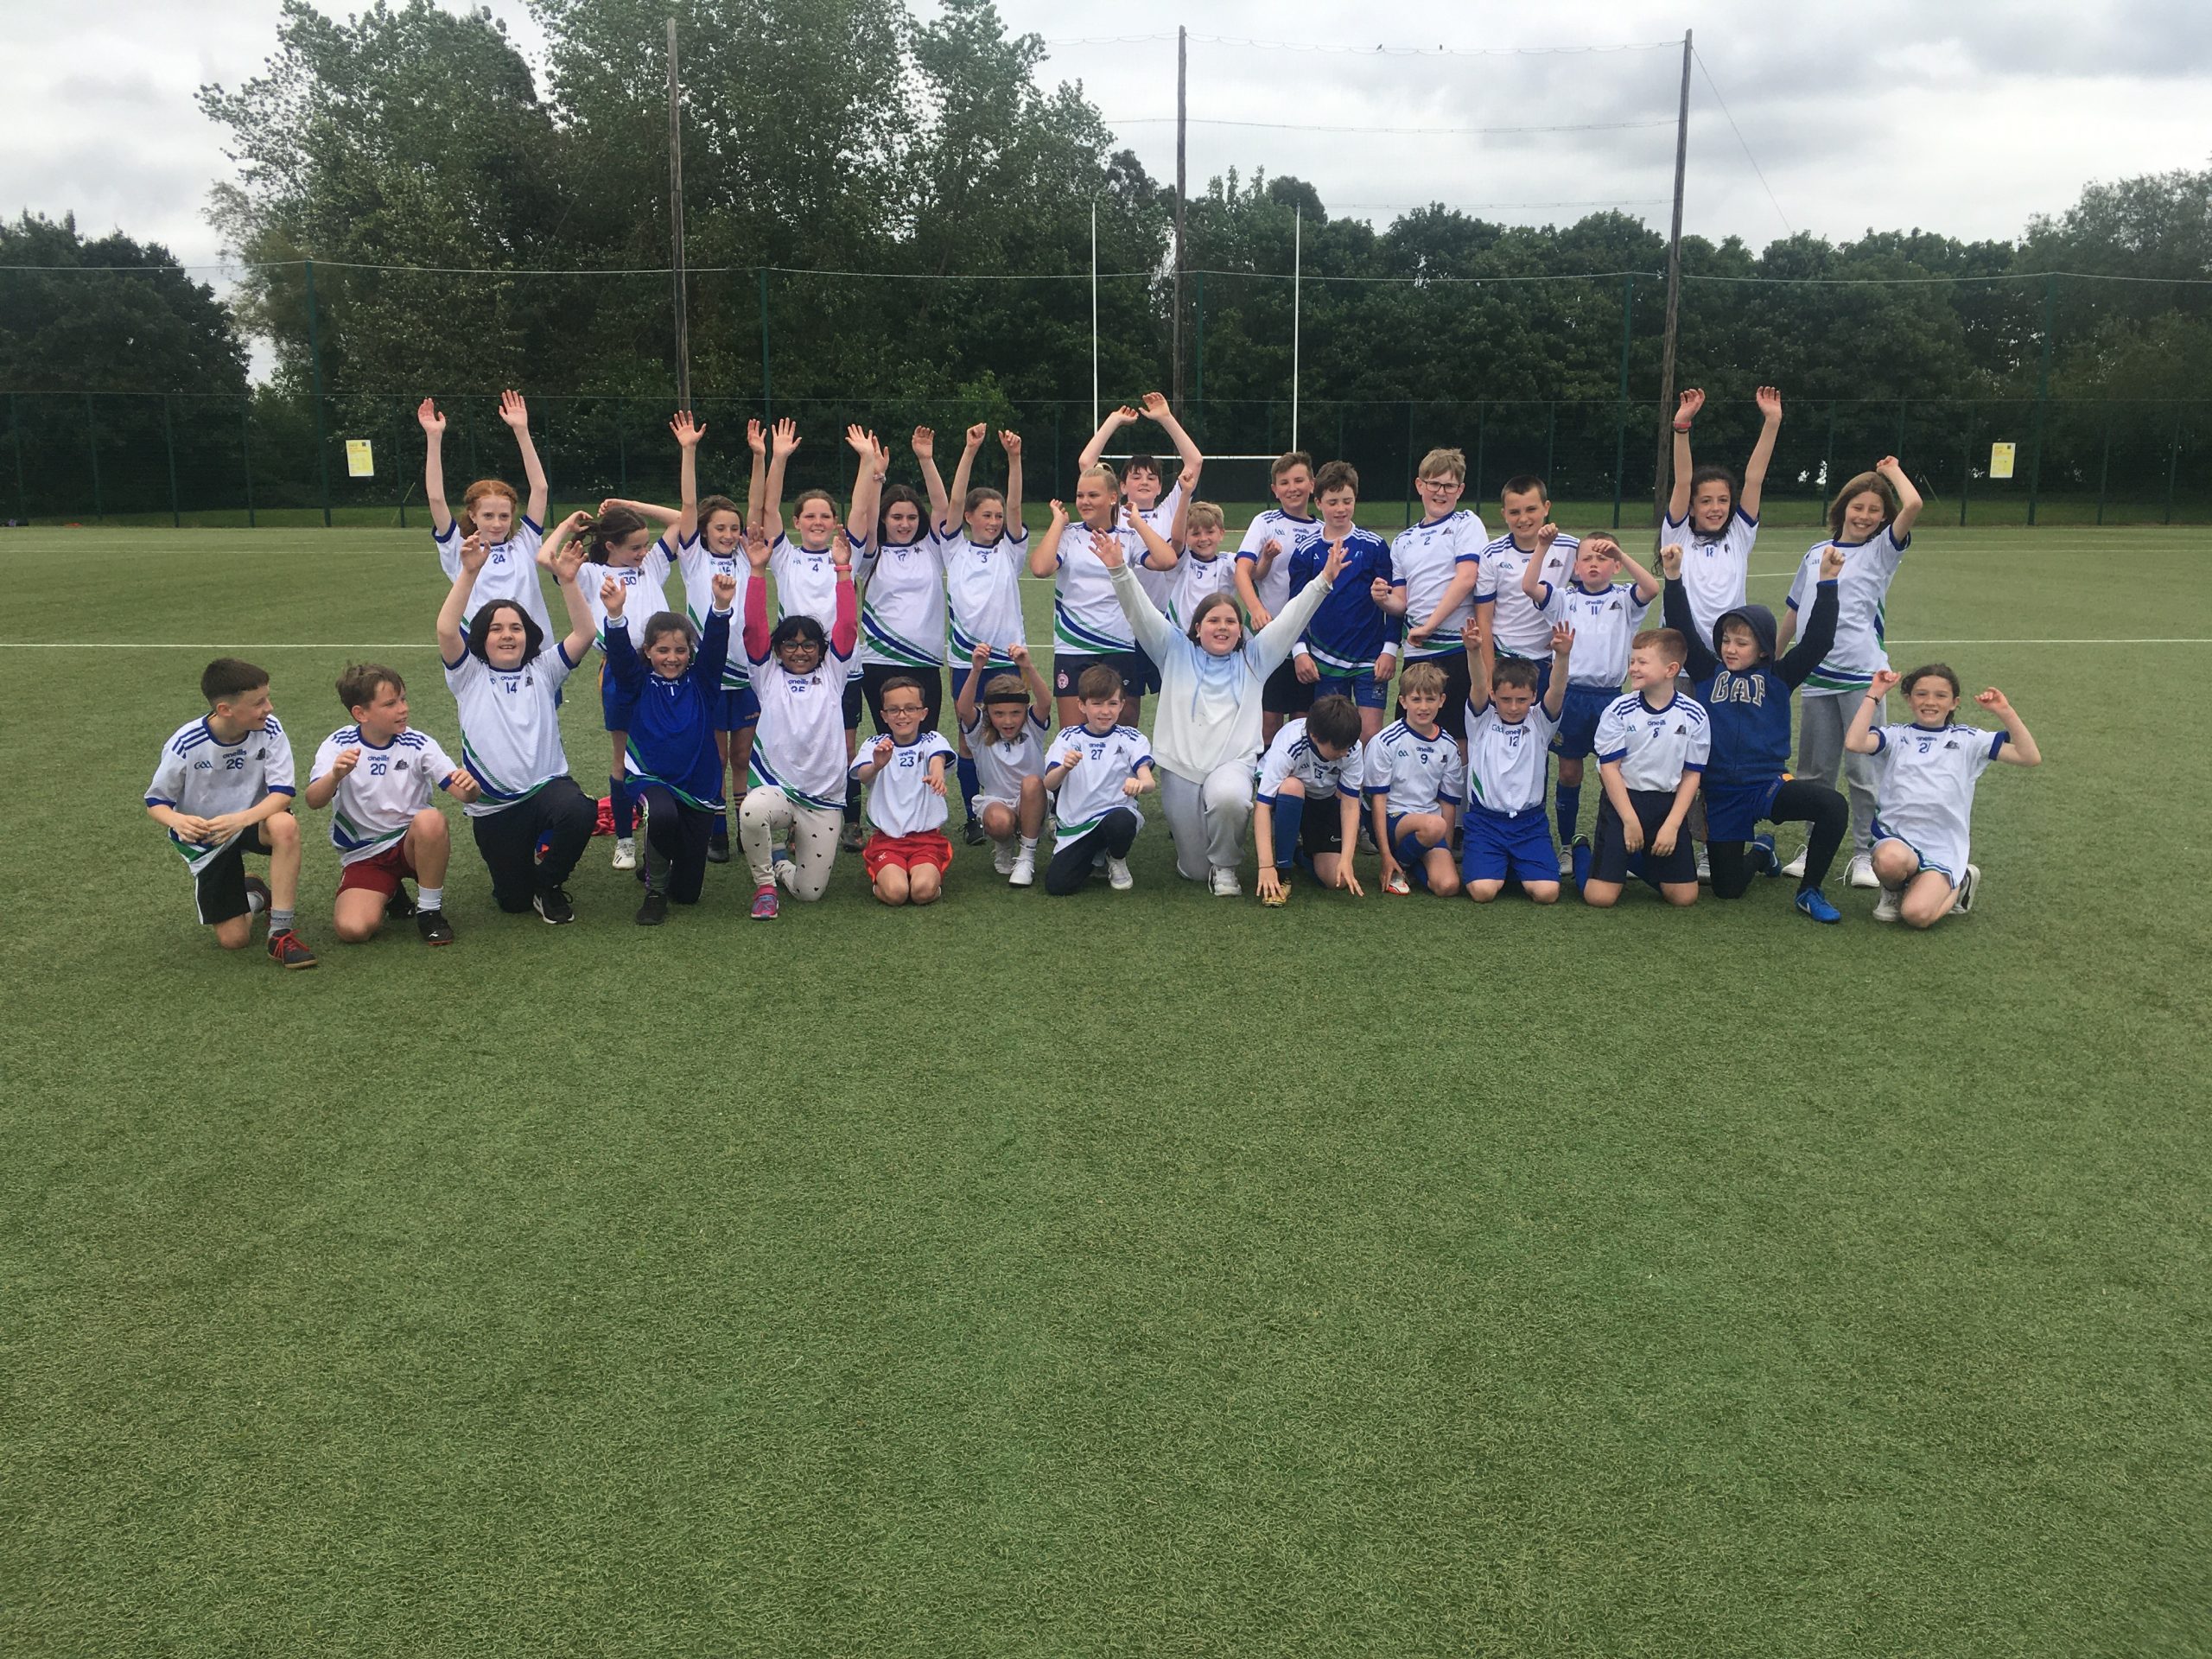 Summer Soccer Tournament for Small Schools  - Congratulations to 3rd, 4th, 5th & 6th classes on their wonderful performance!